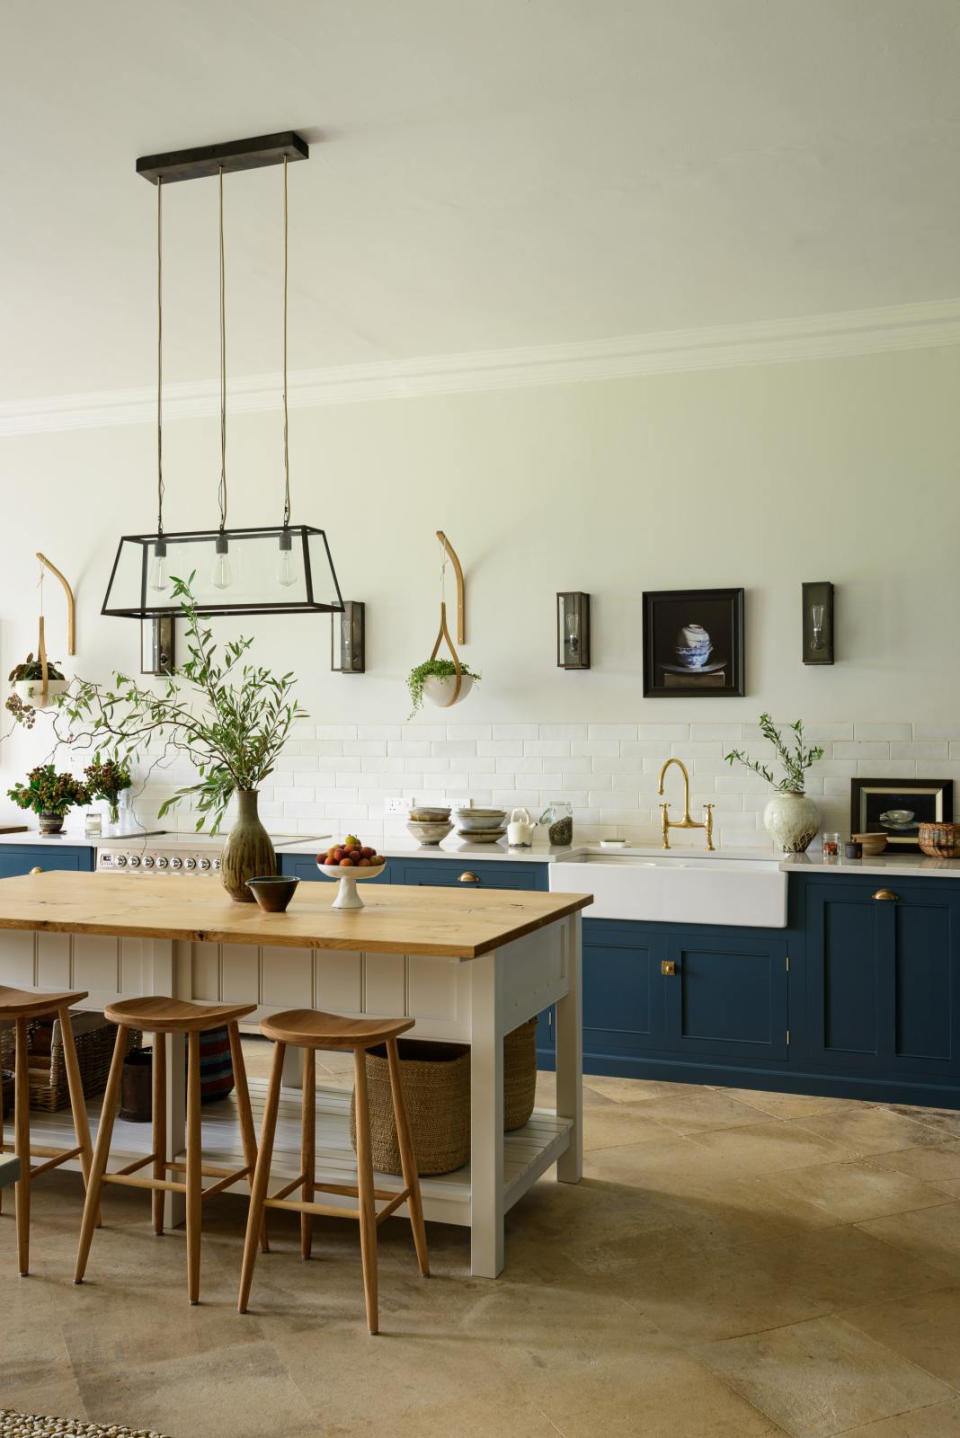 3. Often less is more with kitchen island styling